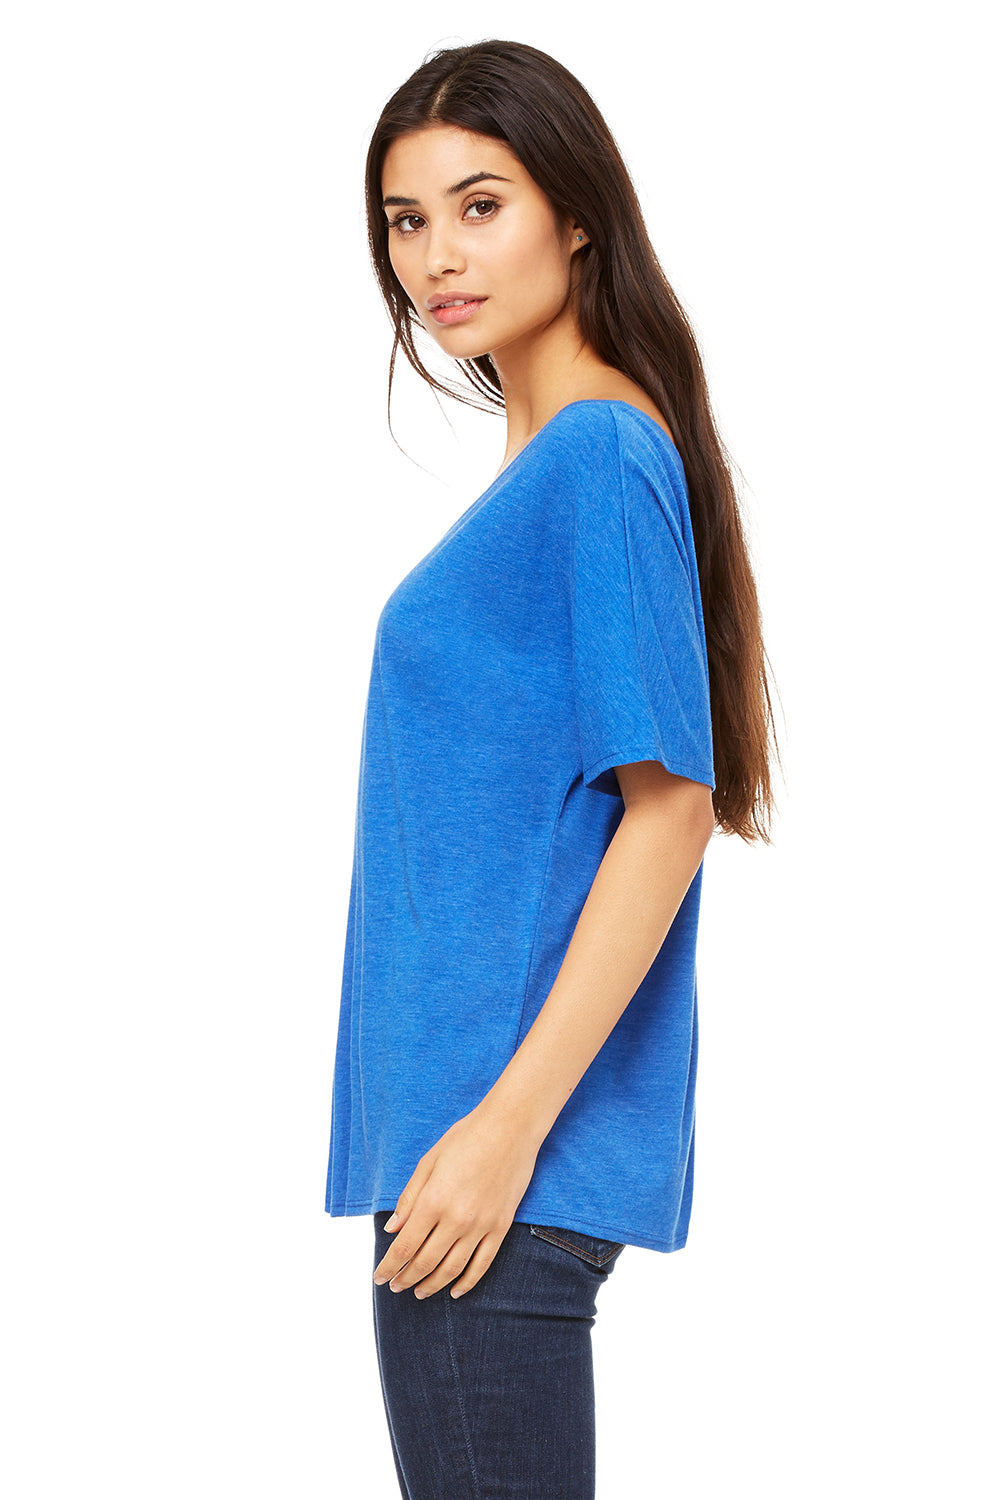 Bella + Canvas 8816 Womens Slouchy Short Sleeve Wide Neck T-Shirt Royal Blue Triblend Side